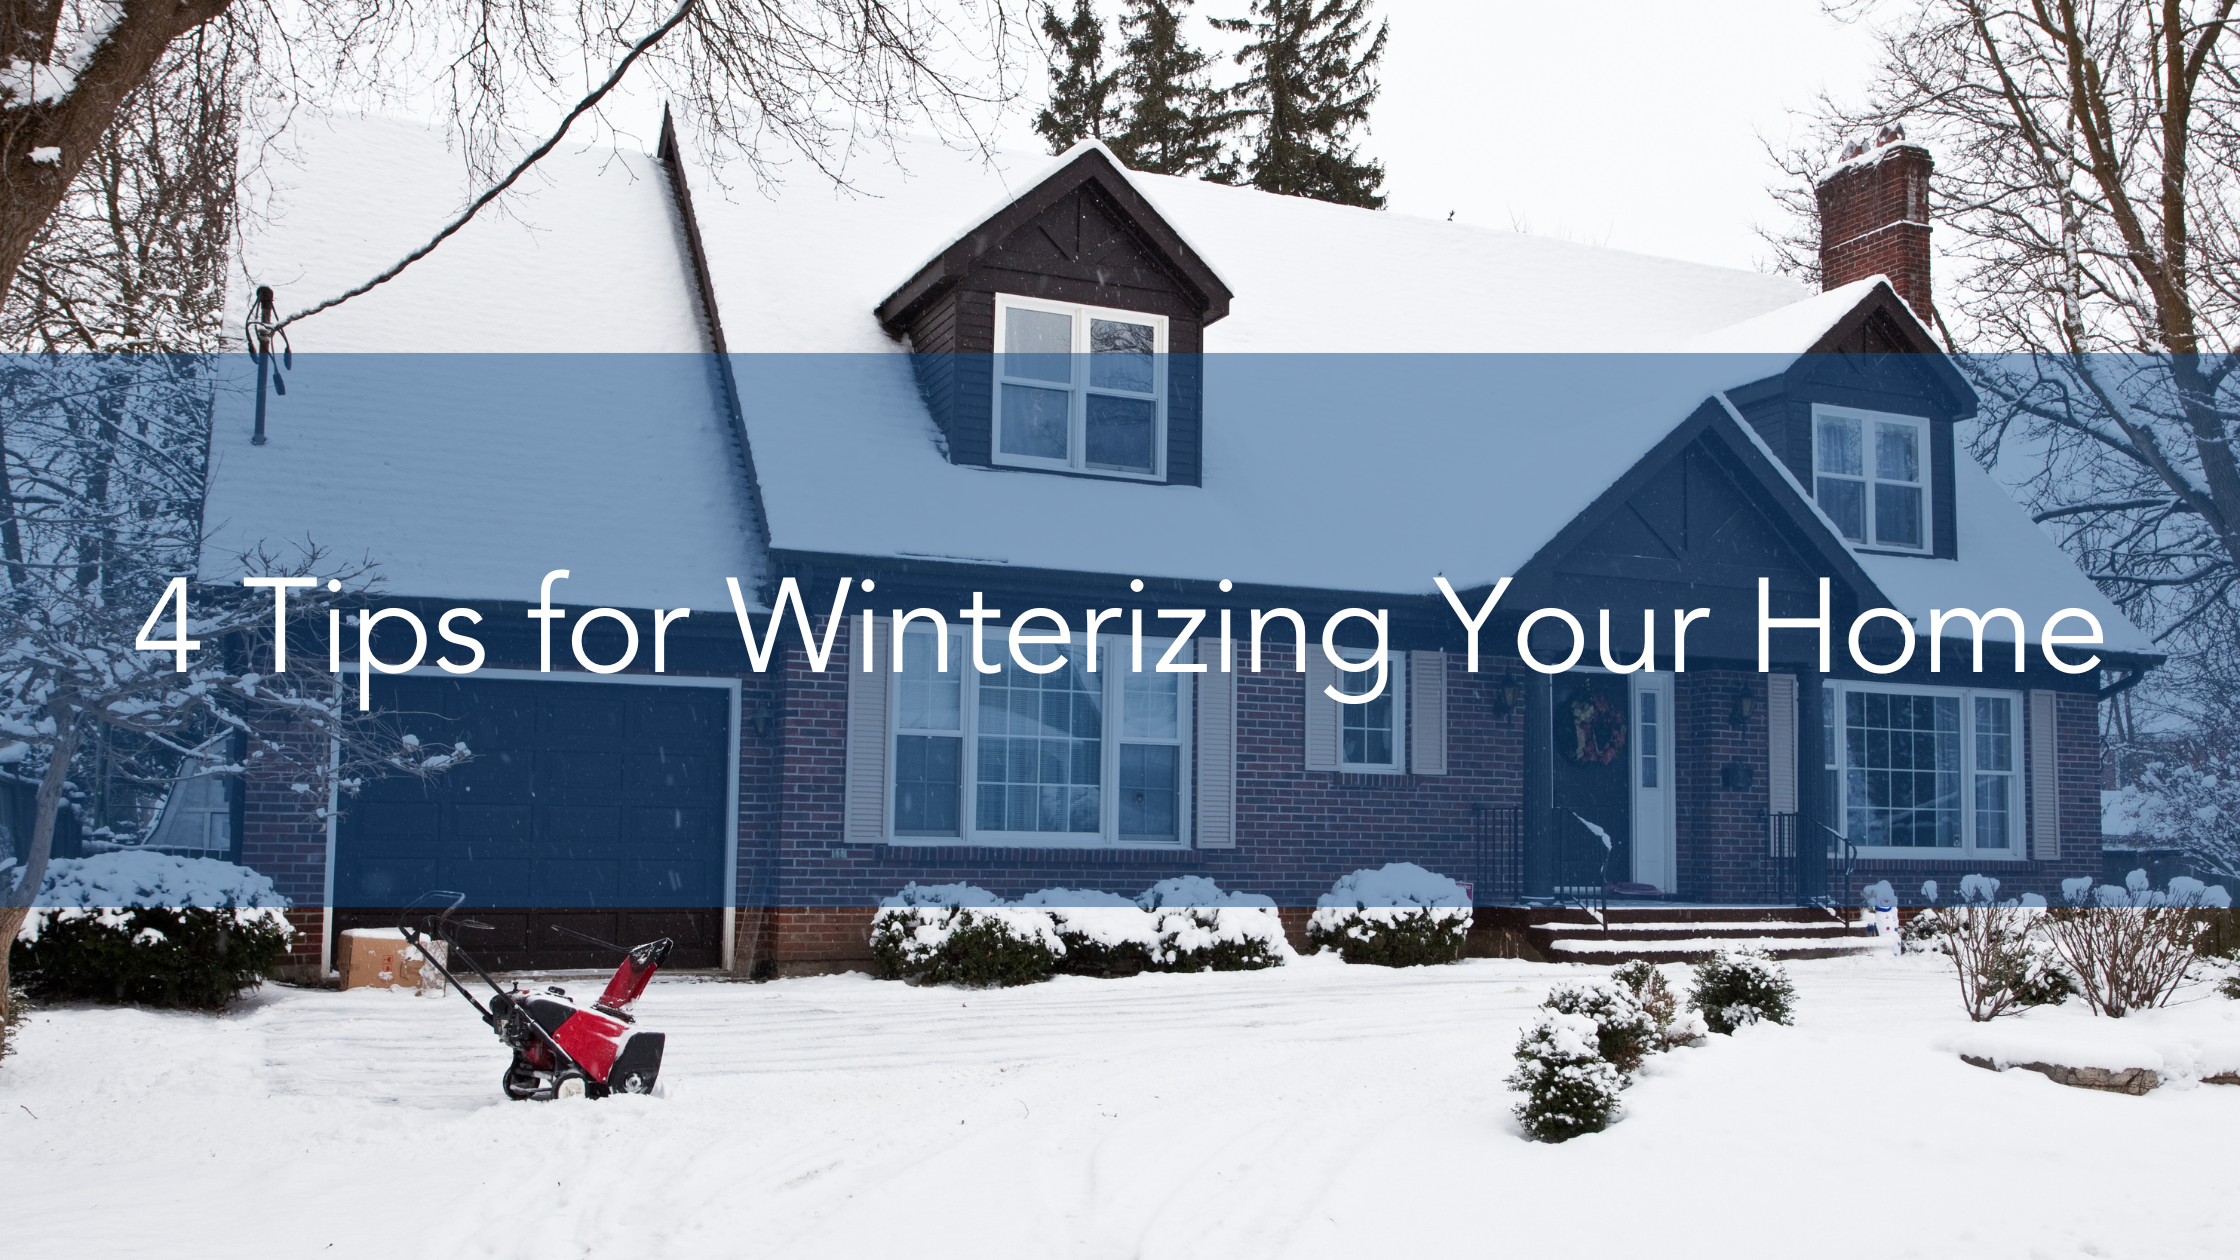 https://handymanconnection.com/wp-content/uploads/2022/12/4-Tips-for-Winterizing-Your-Home.png